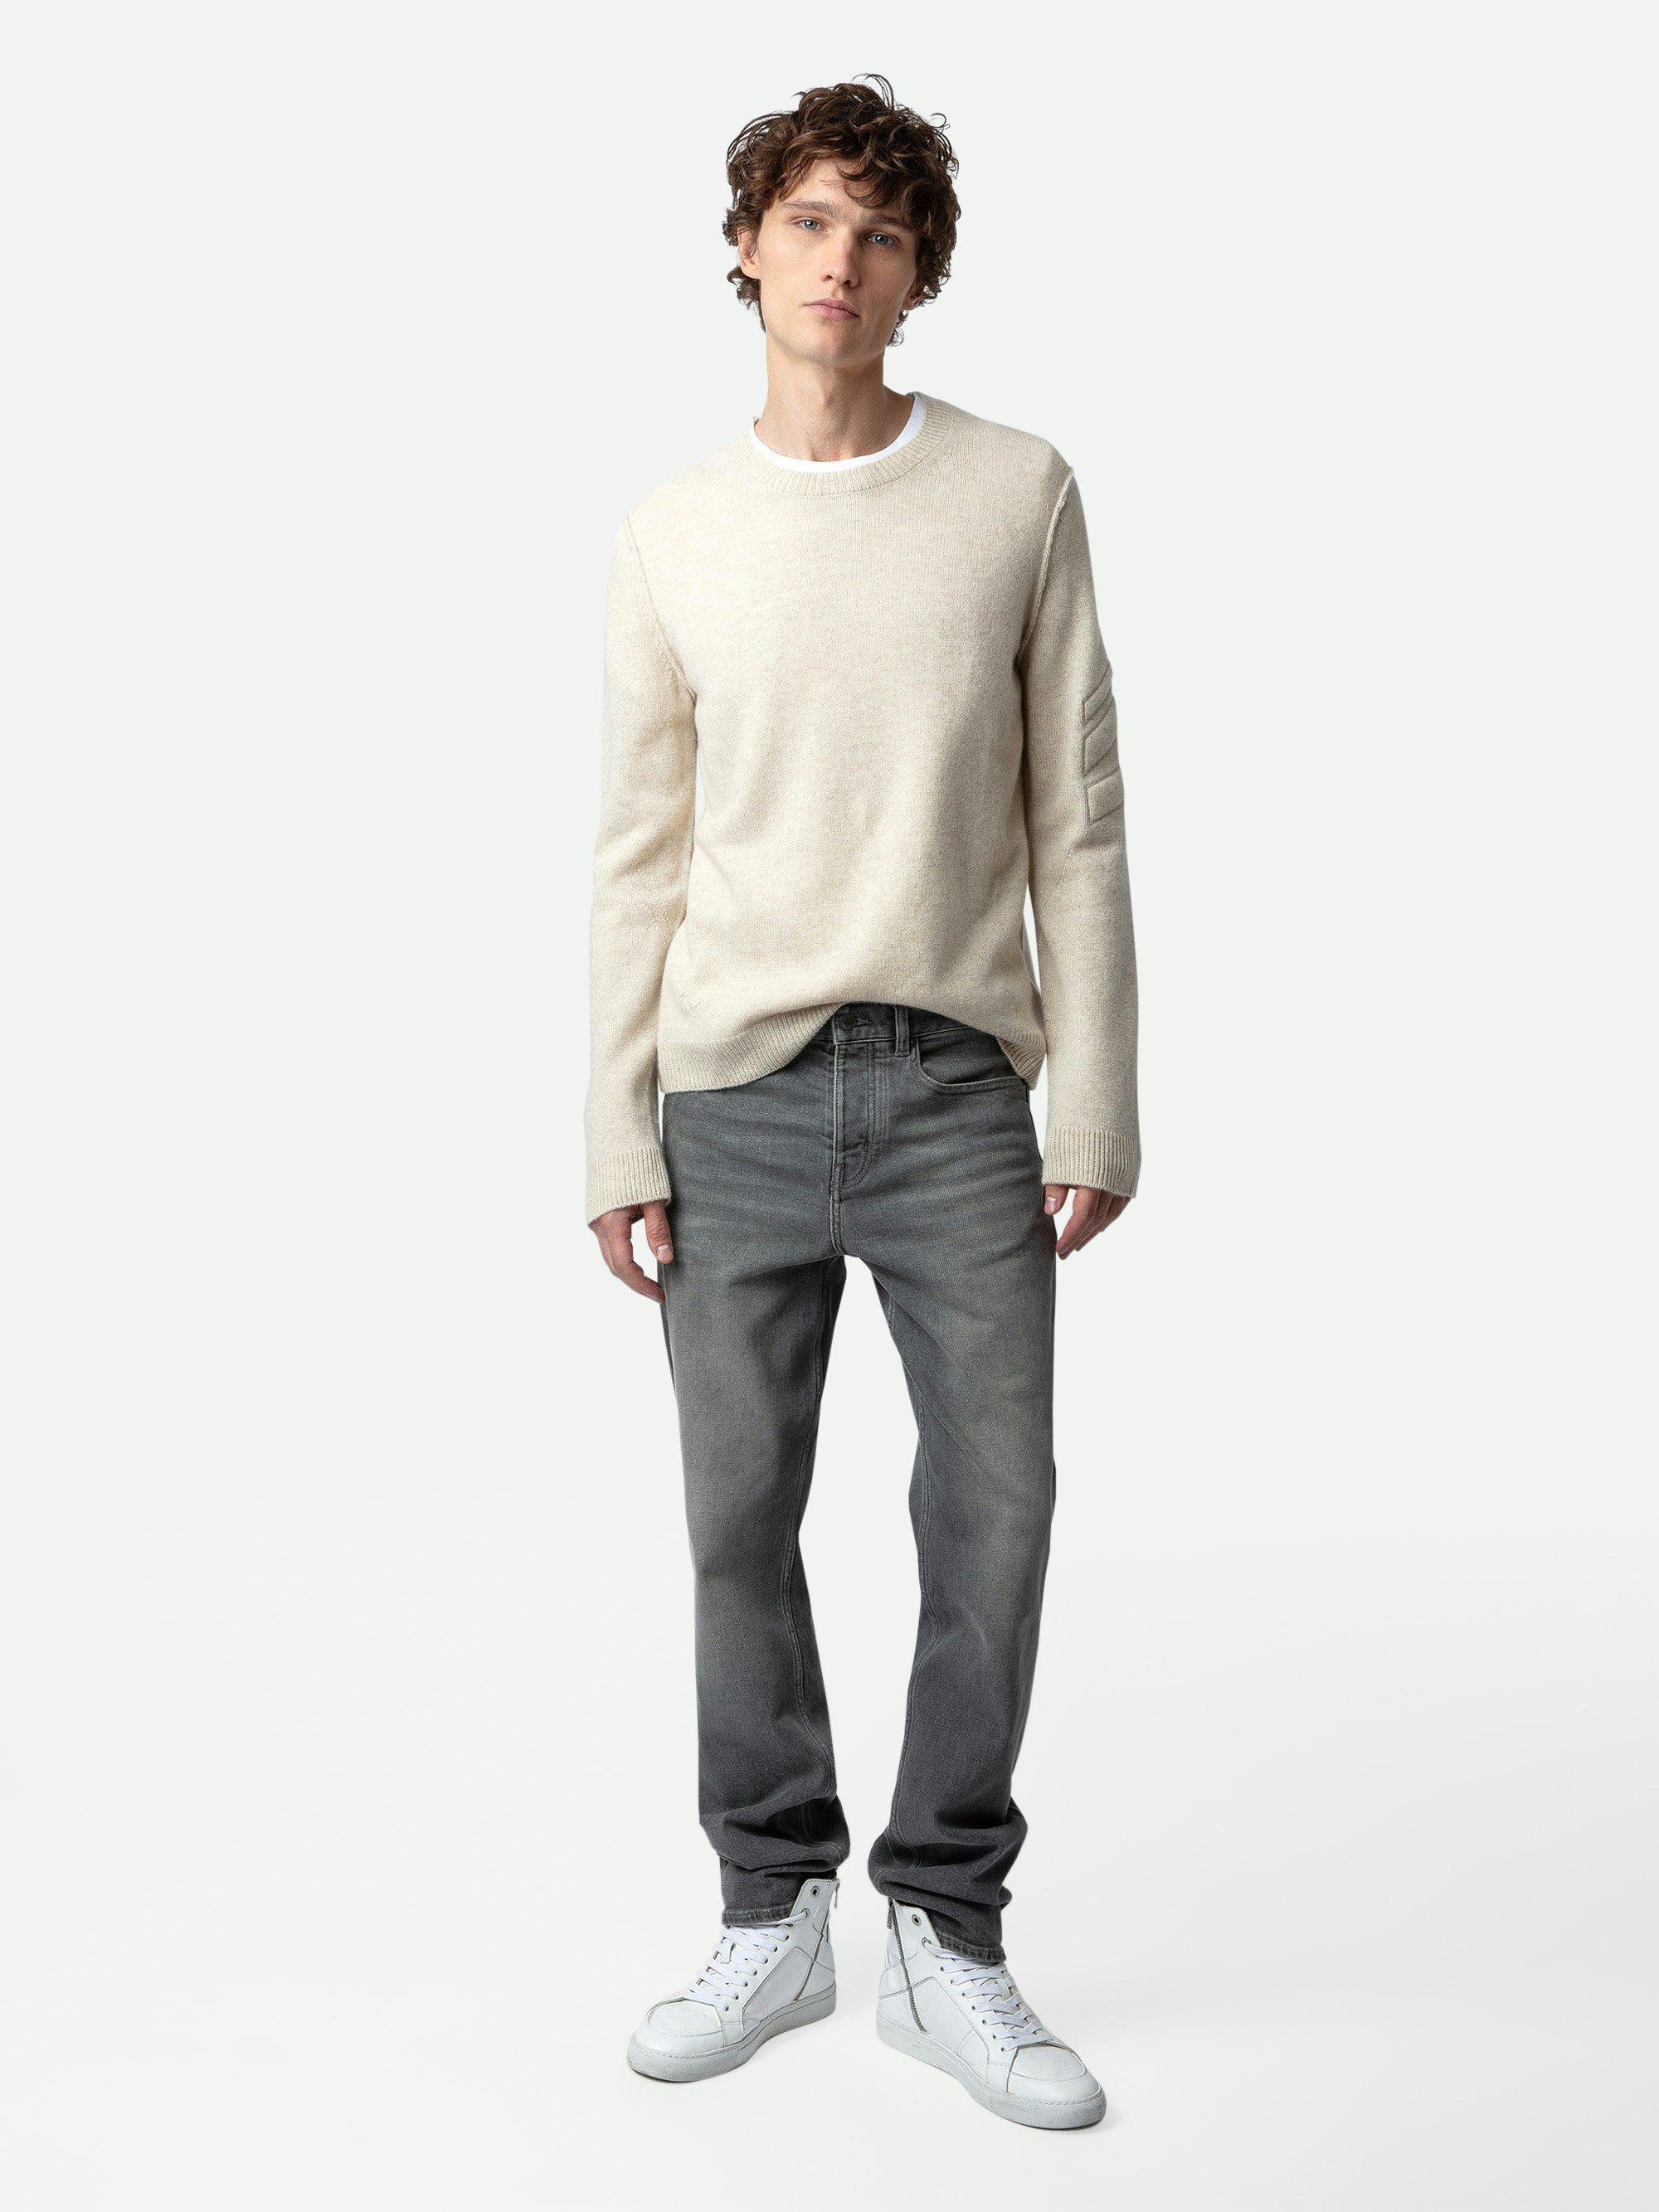 Kennedy Jumper 100% Cashmere  - Ecru 100% cashmere round-neck jumper with arrows on the left sleeve.